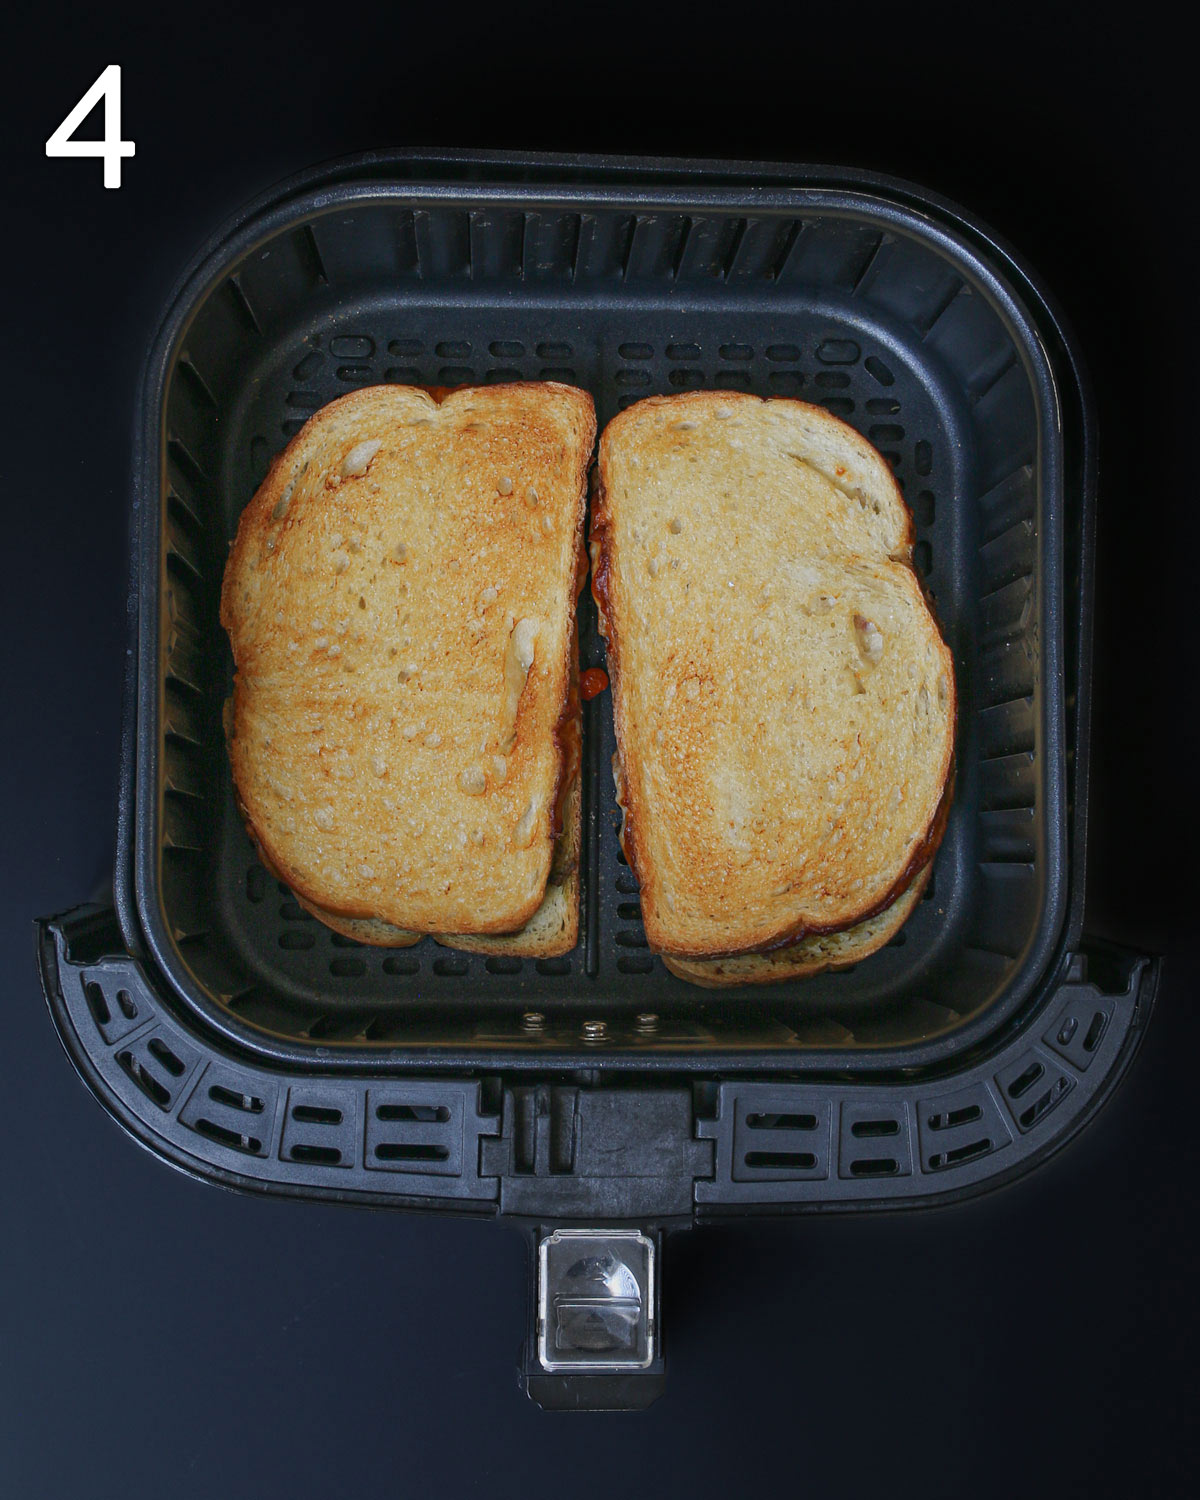 toasted sandwiches in air fryer basket.